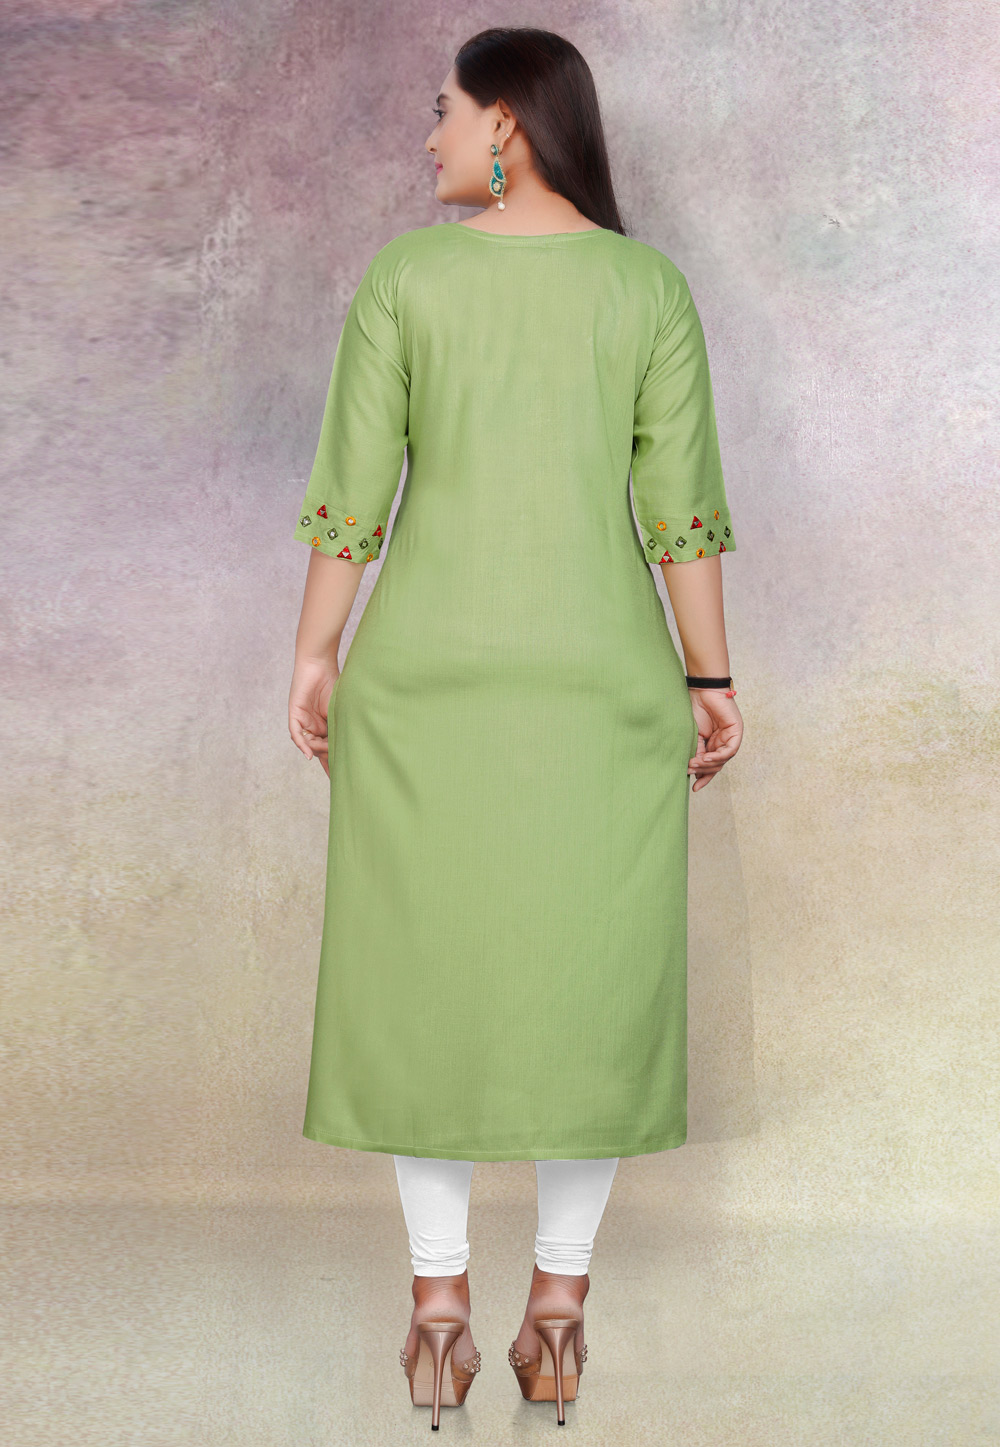 Which colour dupatta should I buy with my white kurti and green leggings? -  Quora